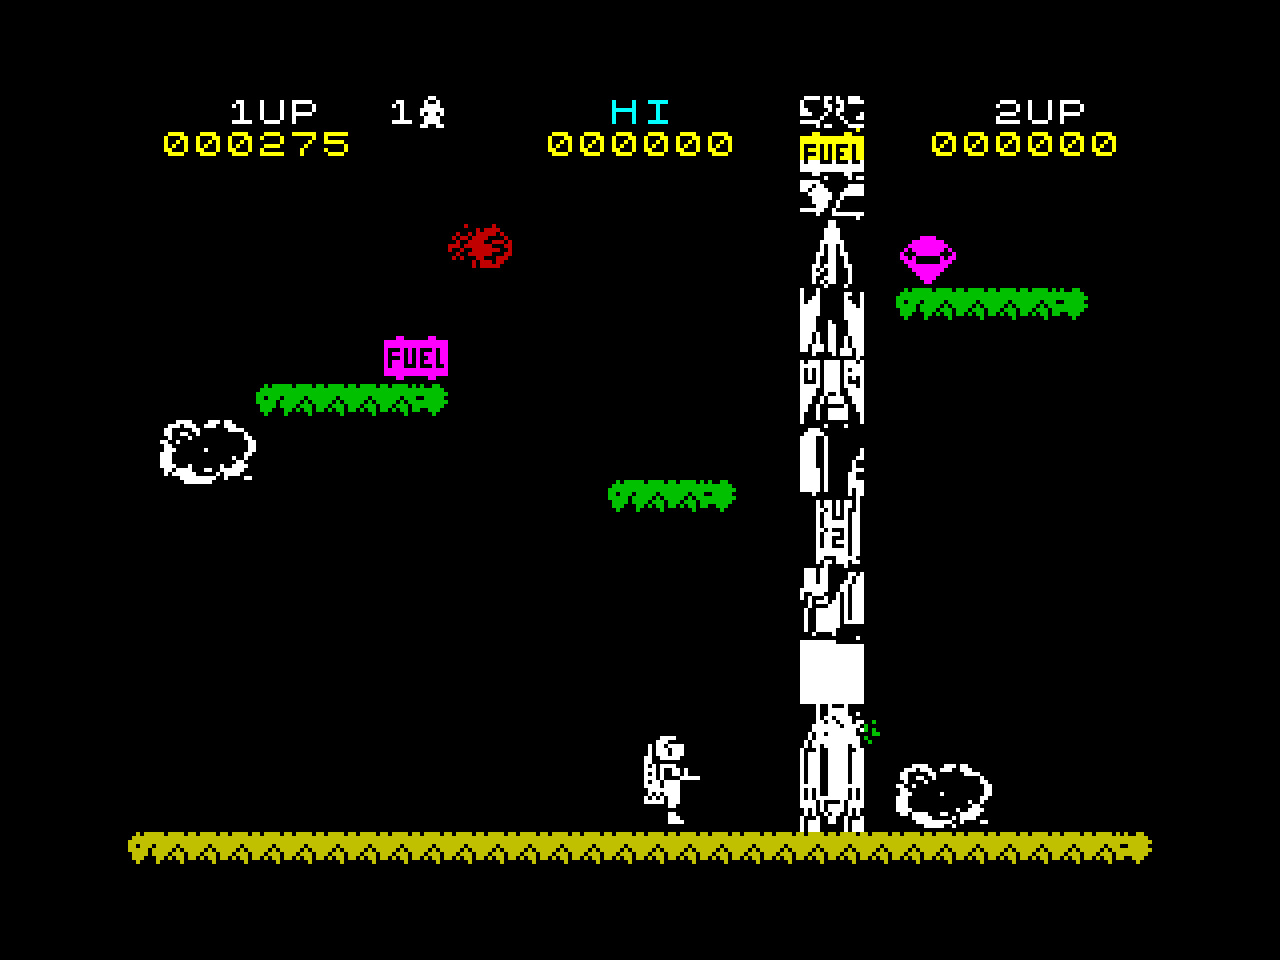 A screenshot from Jetpac on the ZX Spectrum. The rocket ship graphics have corrupted and it has turned into an improbable tower of jumbled spaceship parts.